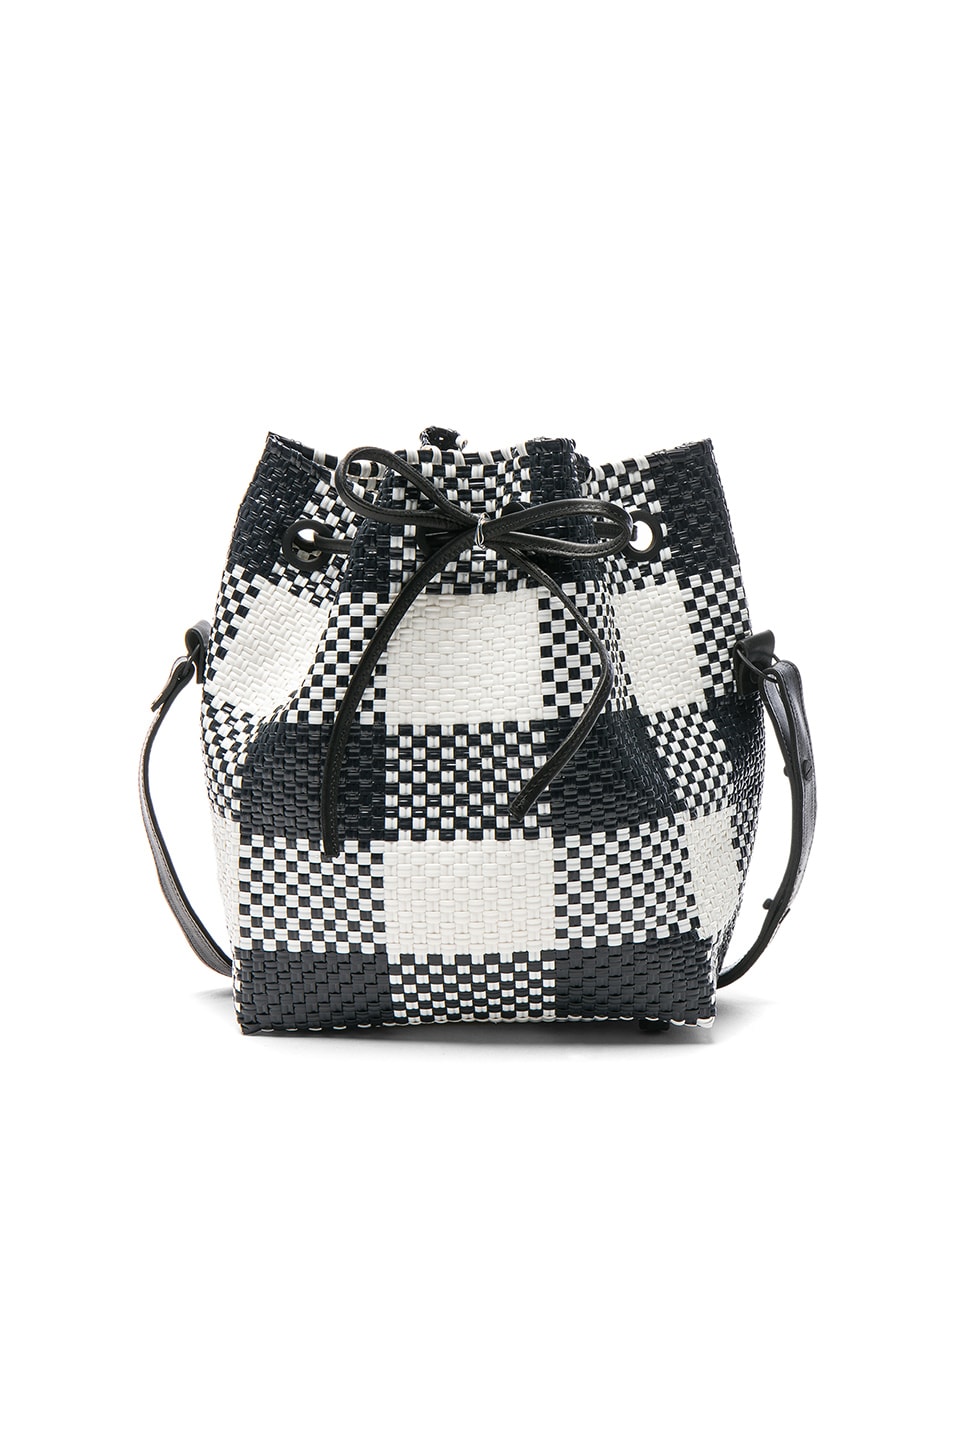 Image 1 of Truss Large Bucket in Black & White Plaid